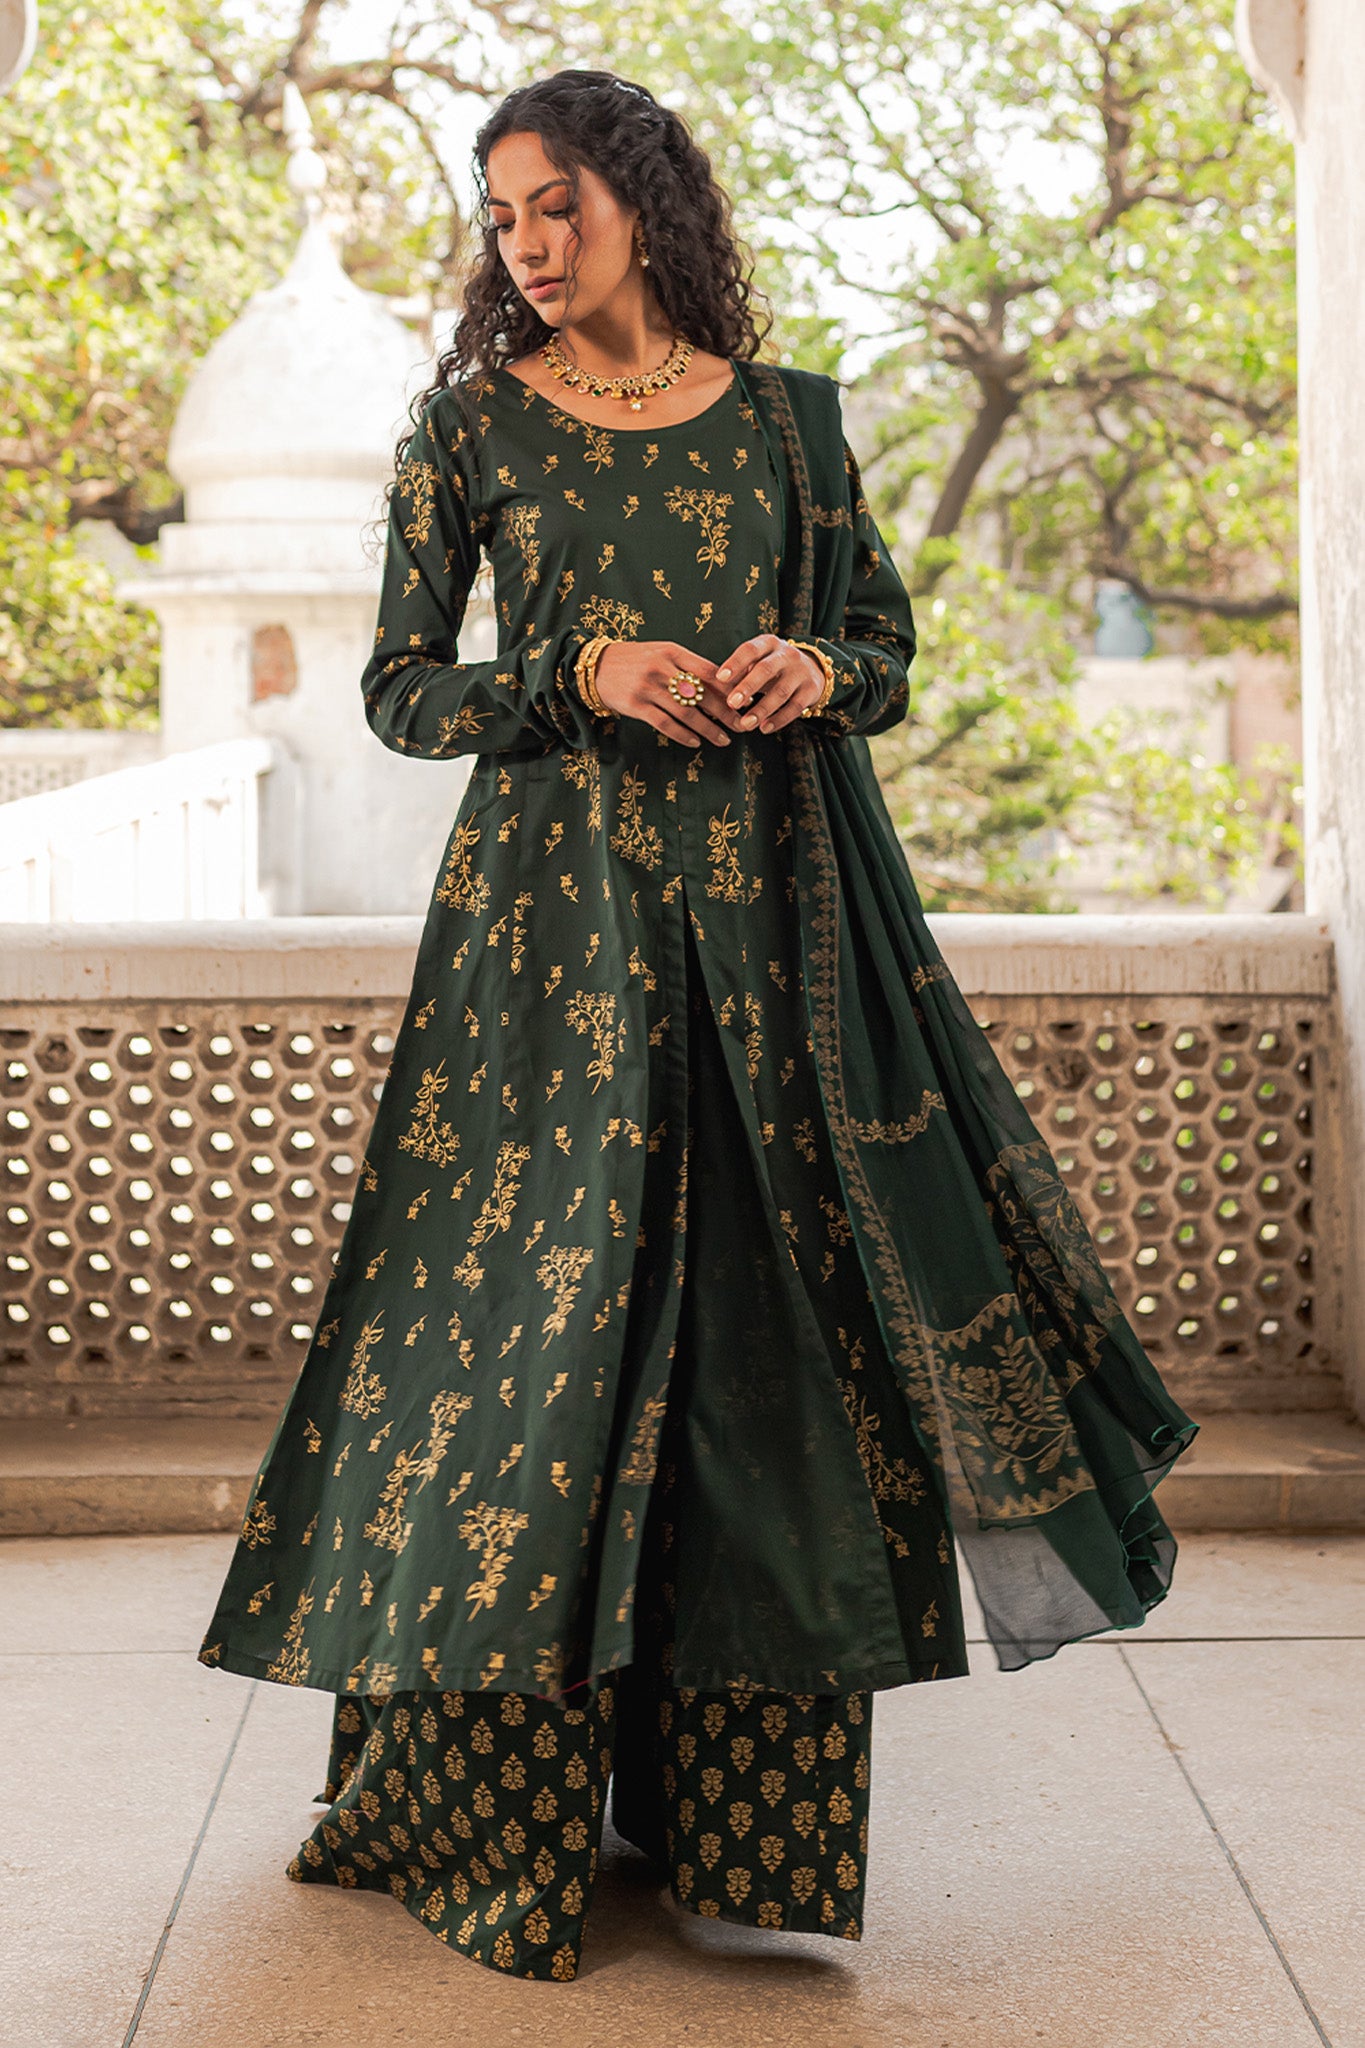 Simply Splendid an Intricately Crafted Saree Style Gown with Cape & Belt